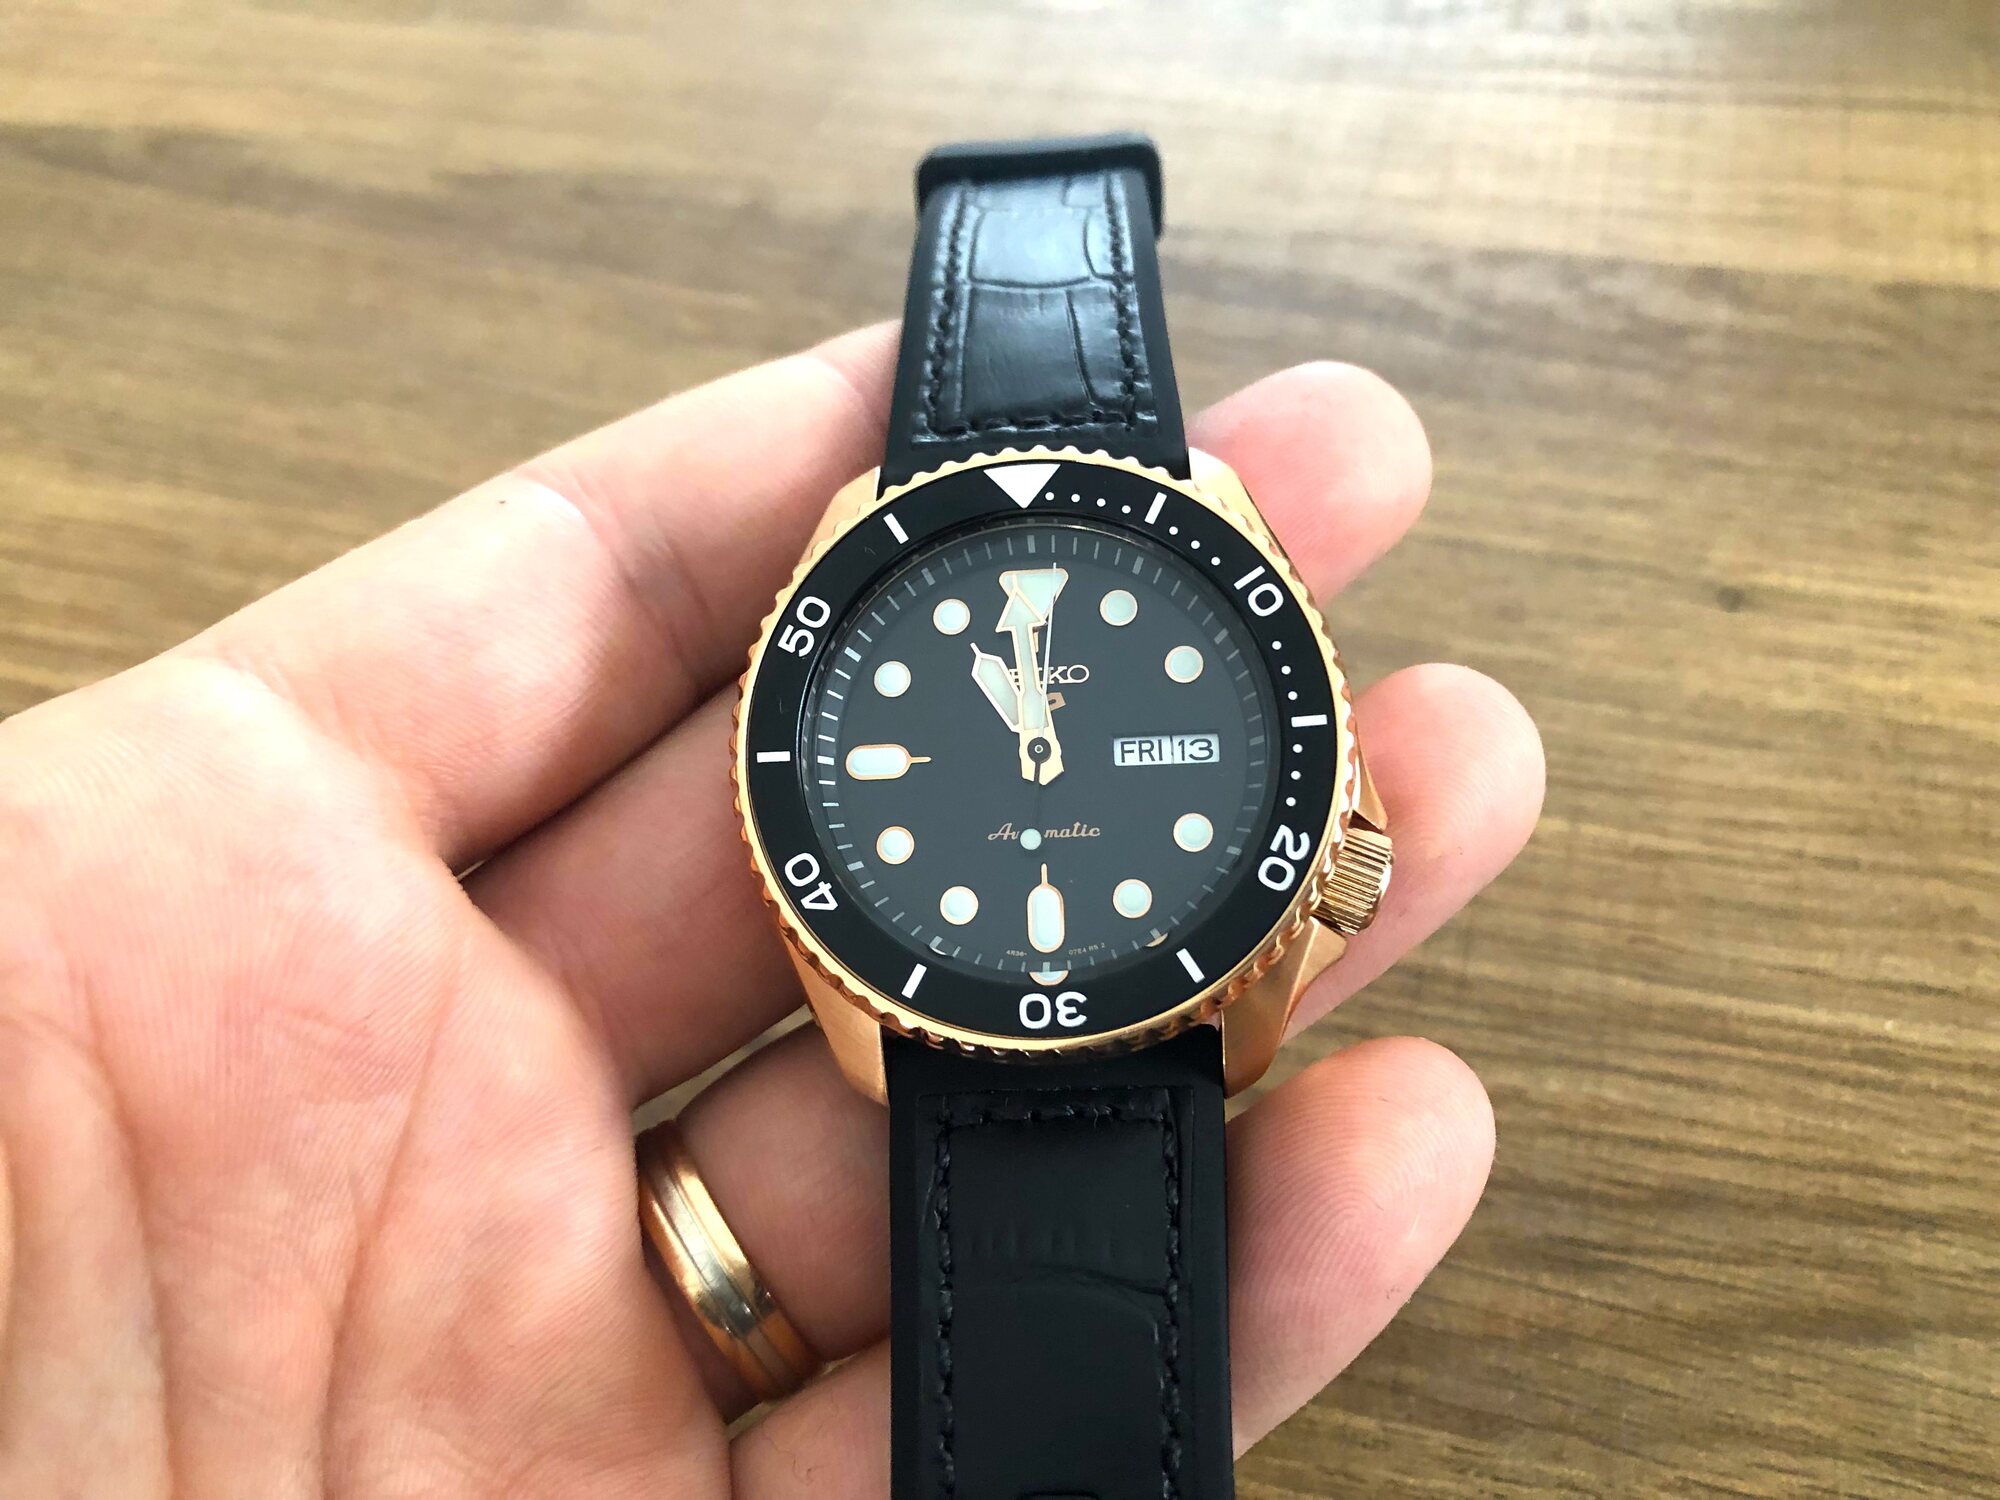 Black silicone strap on the Seiko SRPD watch